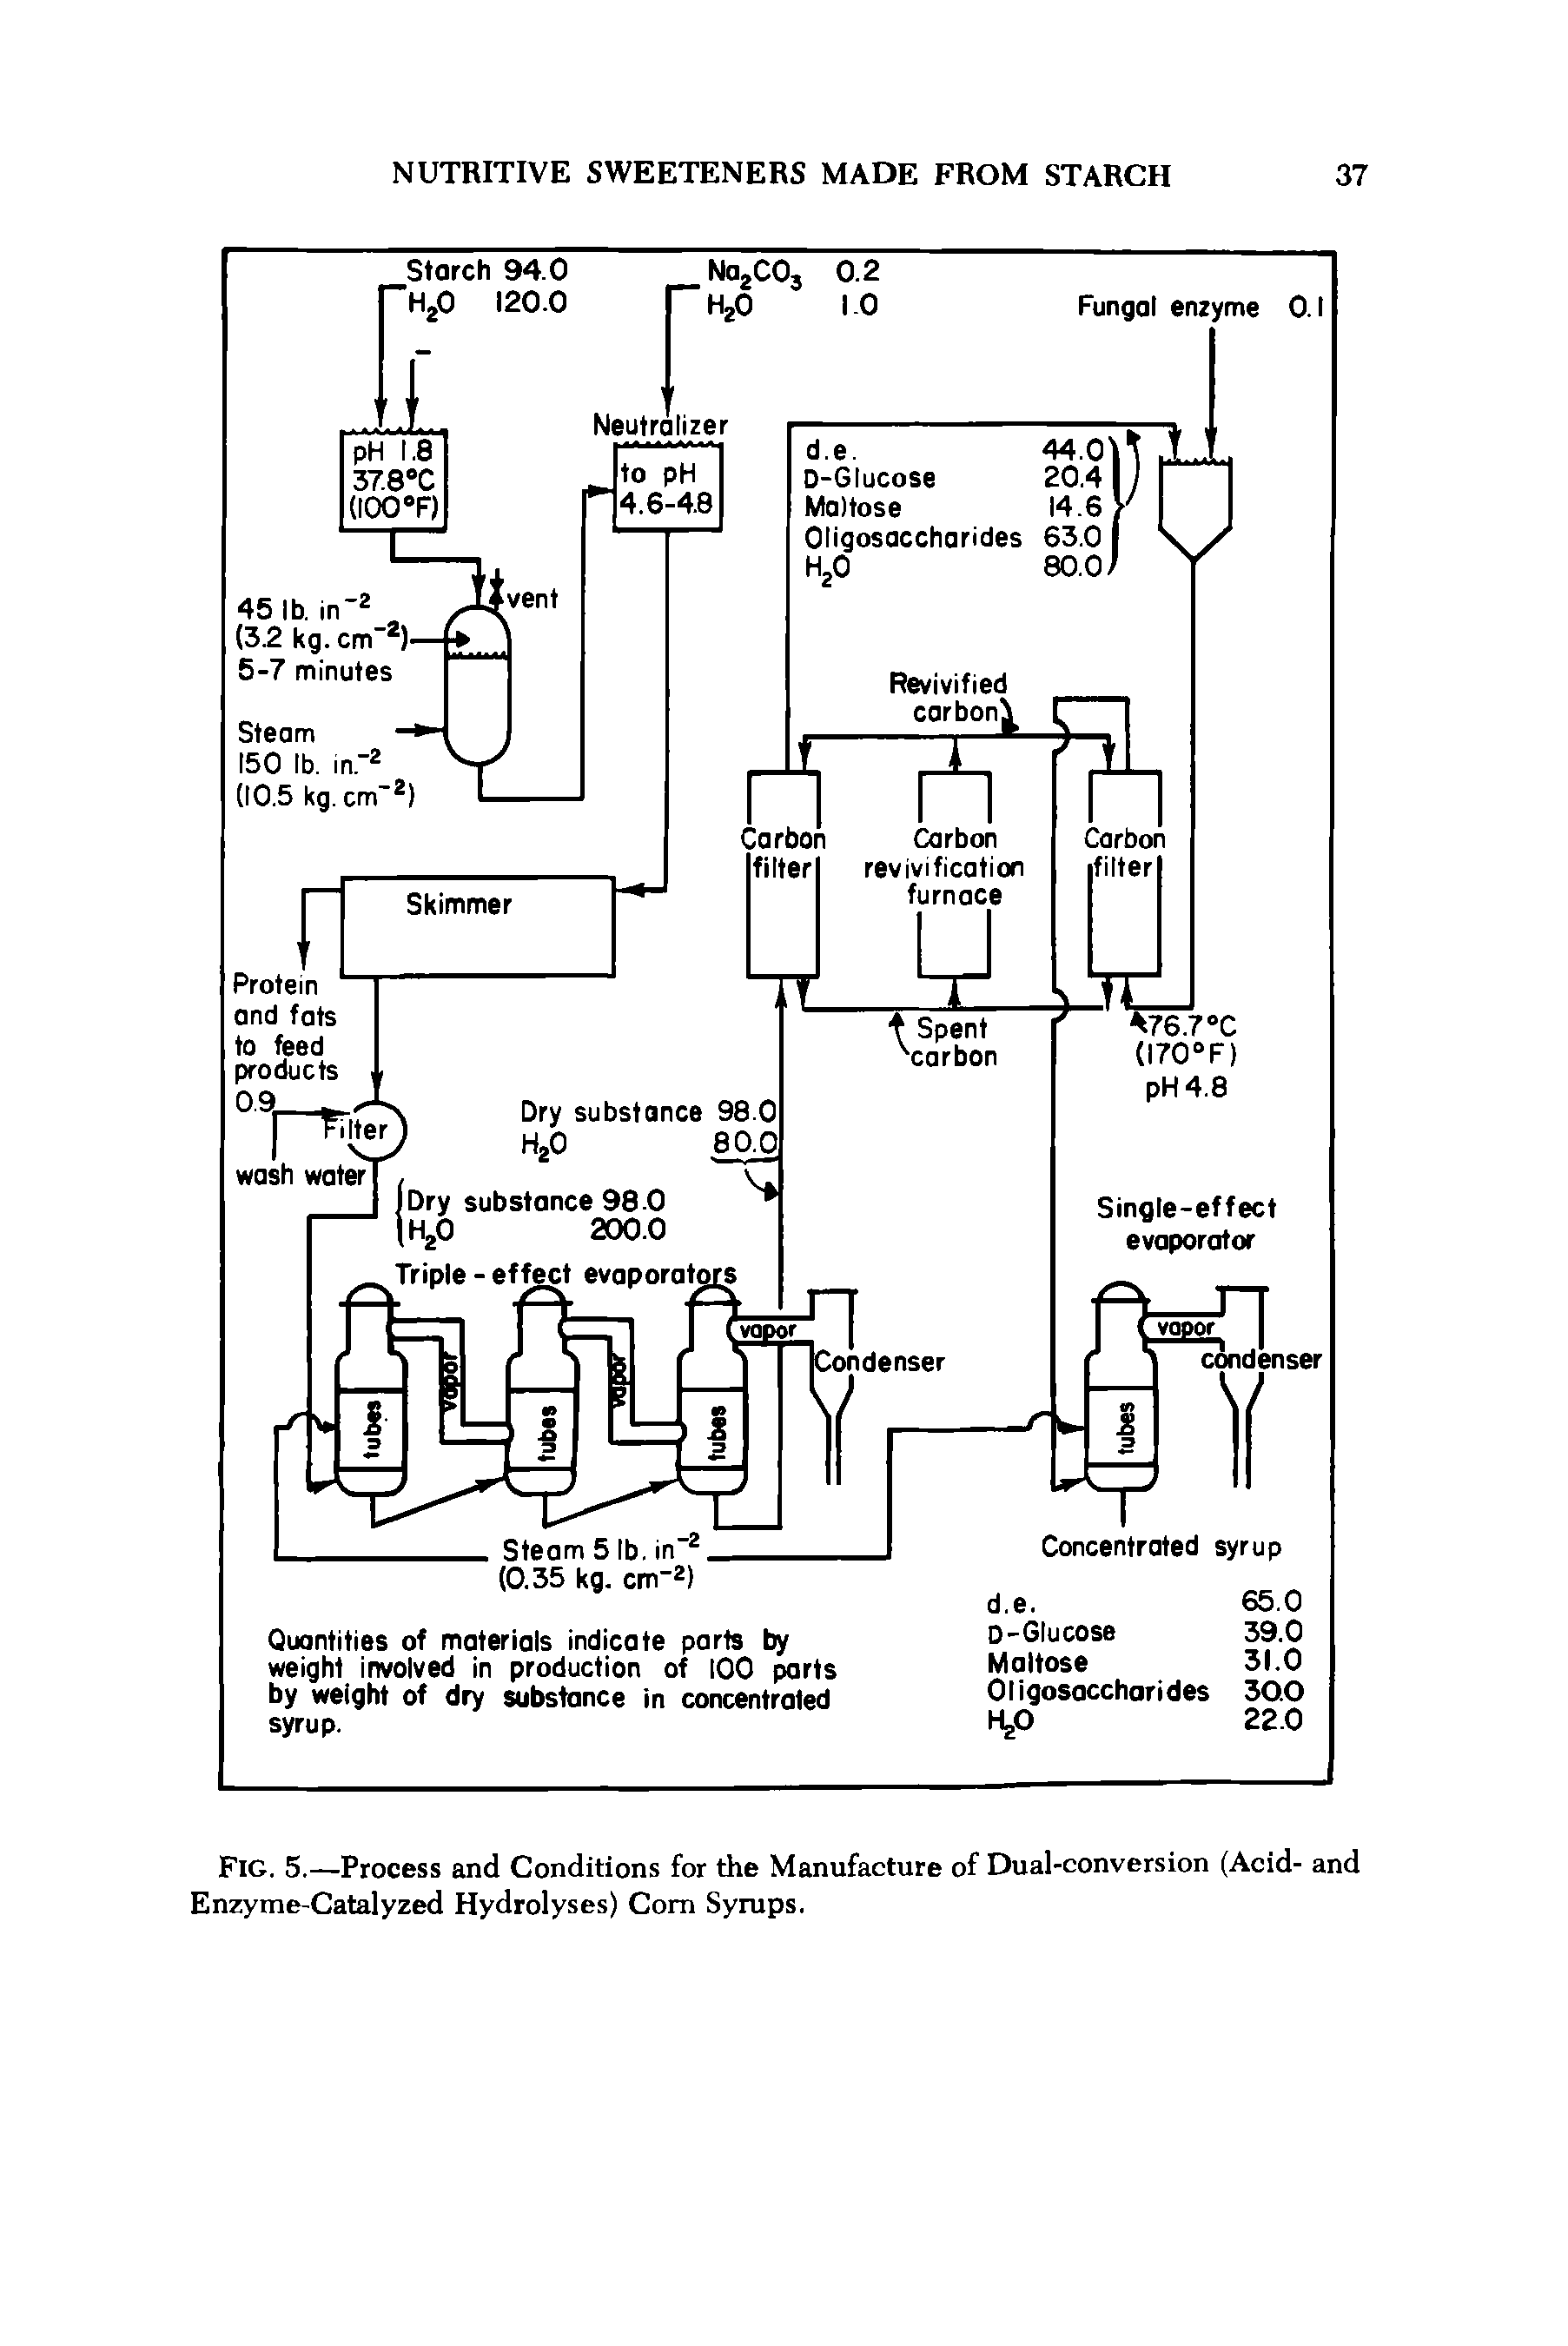 Fig. 5.—Process and Conditions for the Manufacture of Dual-conversion (Acid- and Enzyme-Catalyzed Hydrolyses) Com Syrups.